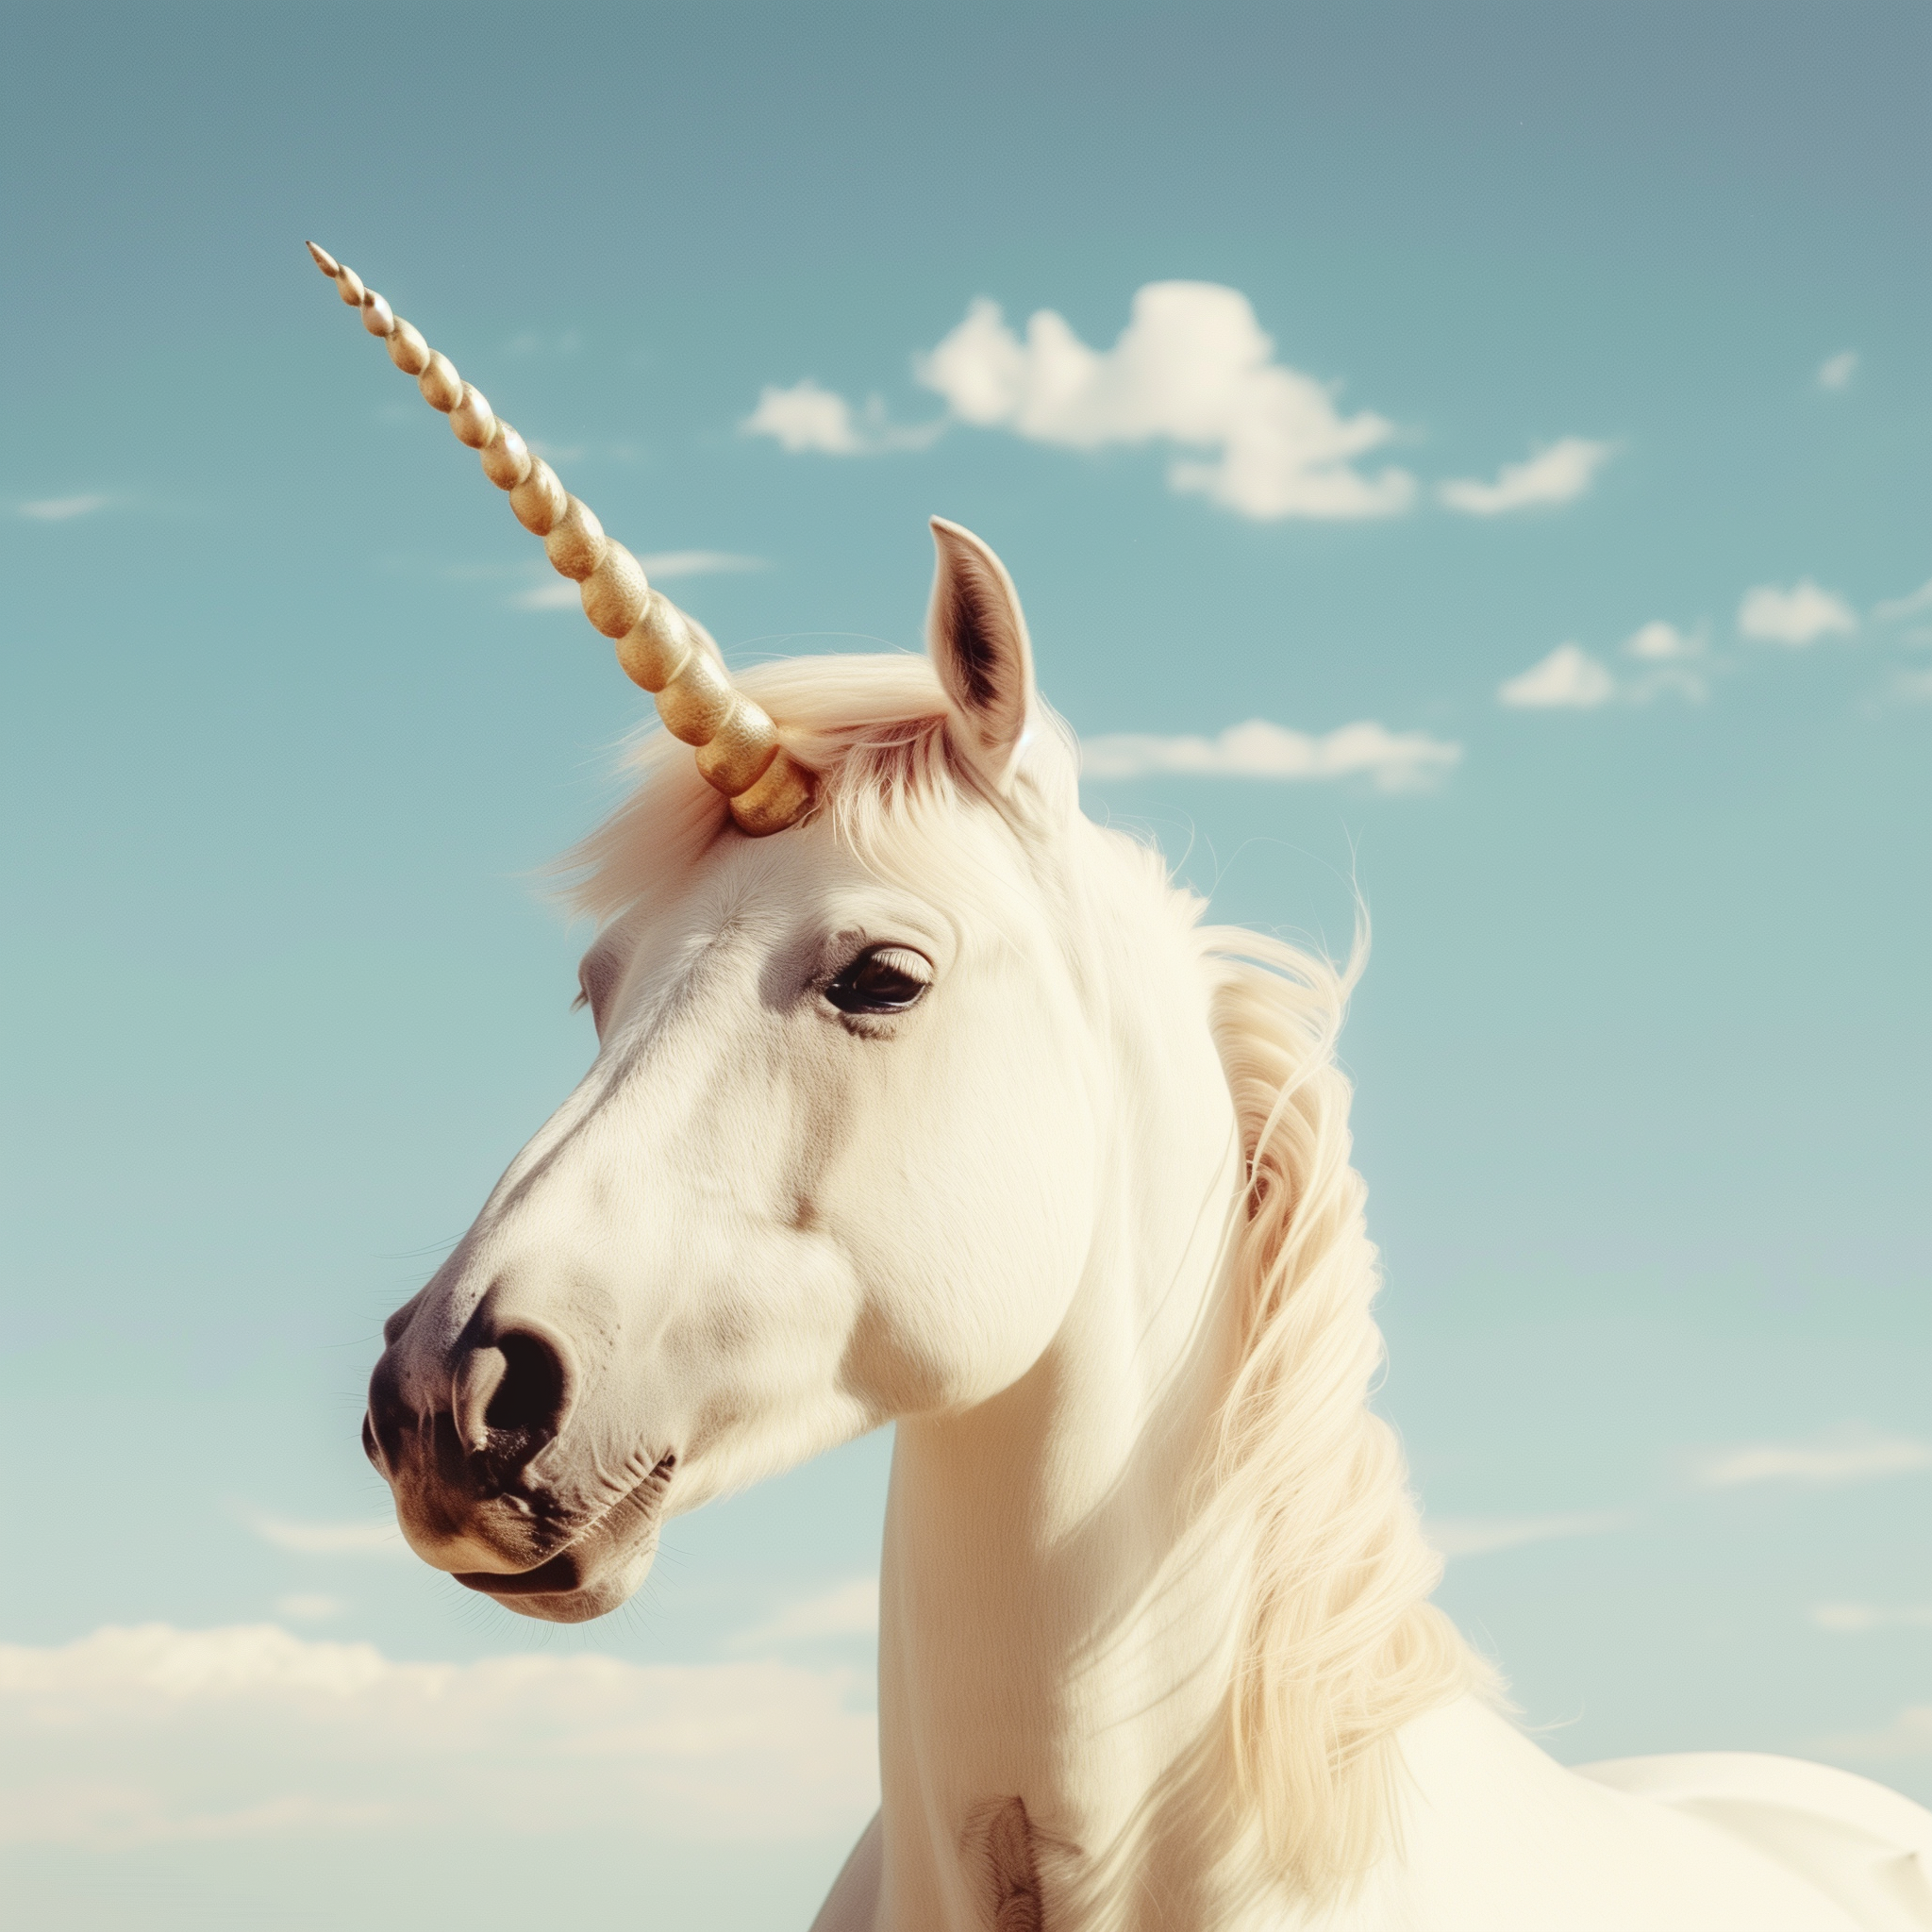 Avatar of a majestic unicorn with a golden horn against a blue sky with fluffy clouds, perfect for a fantasy-themed profile picture.